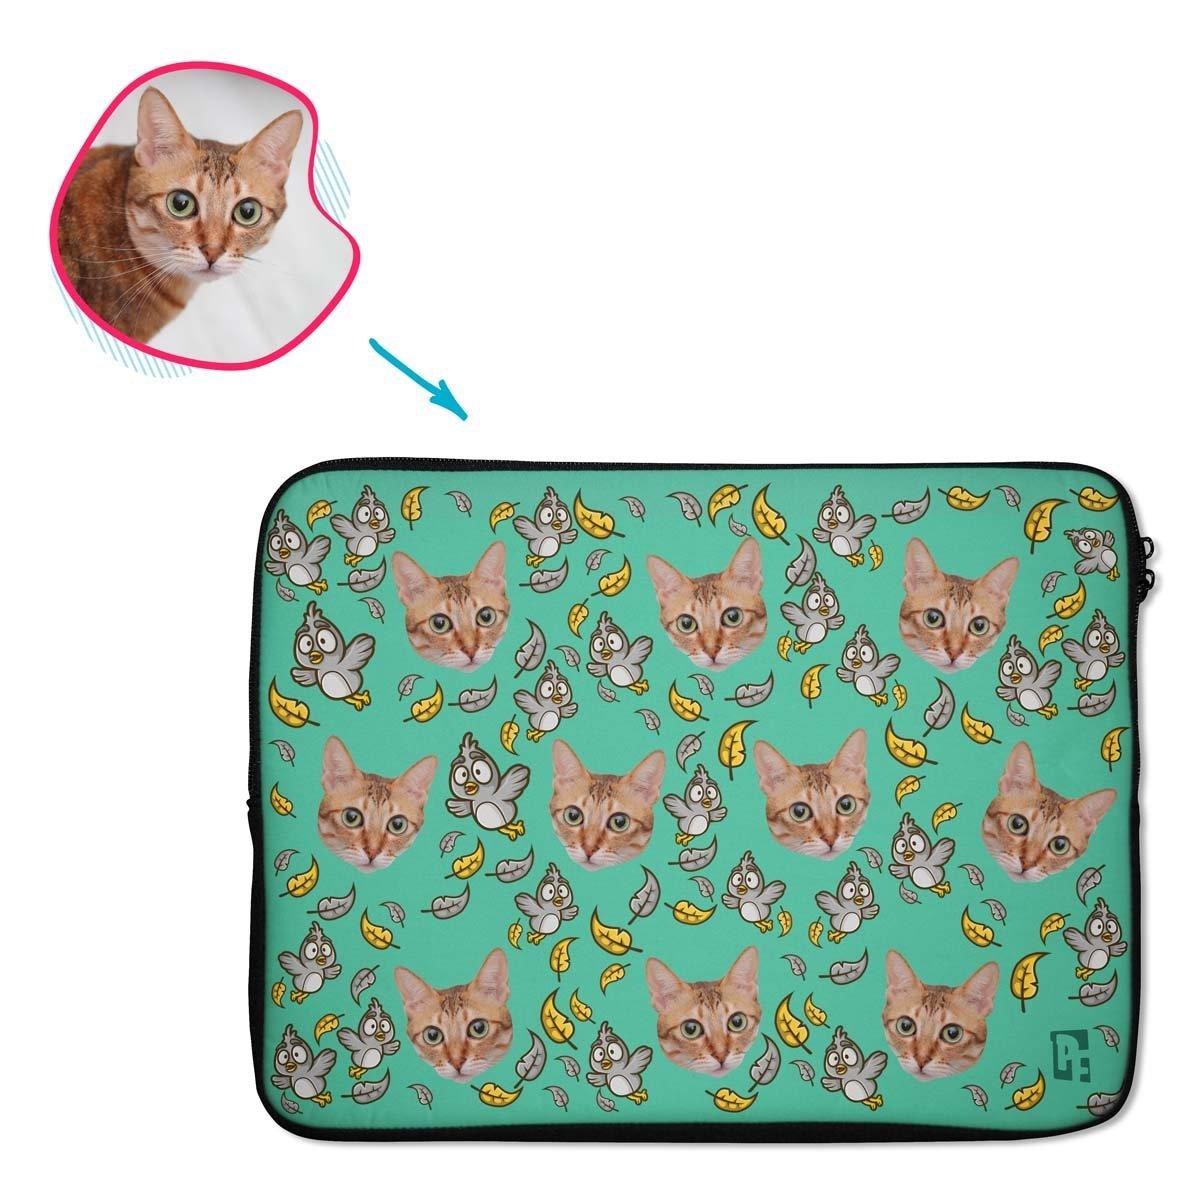 mint Bird laptop sleeve personalized with photo of face printed on them